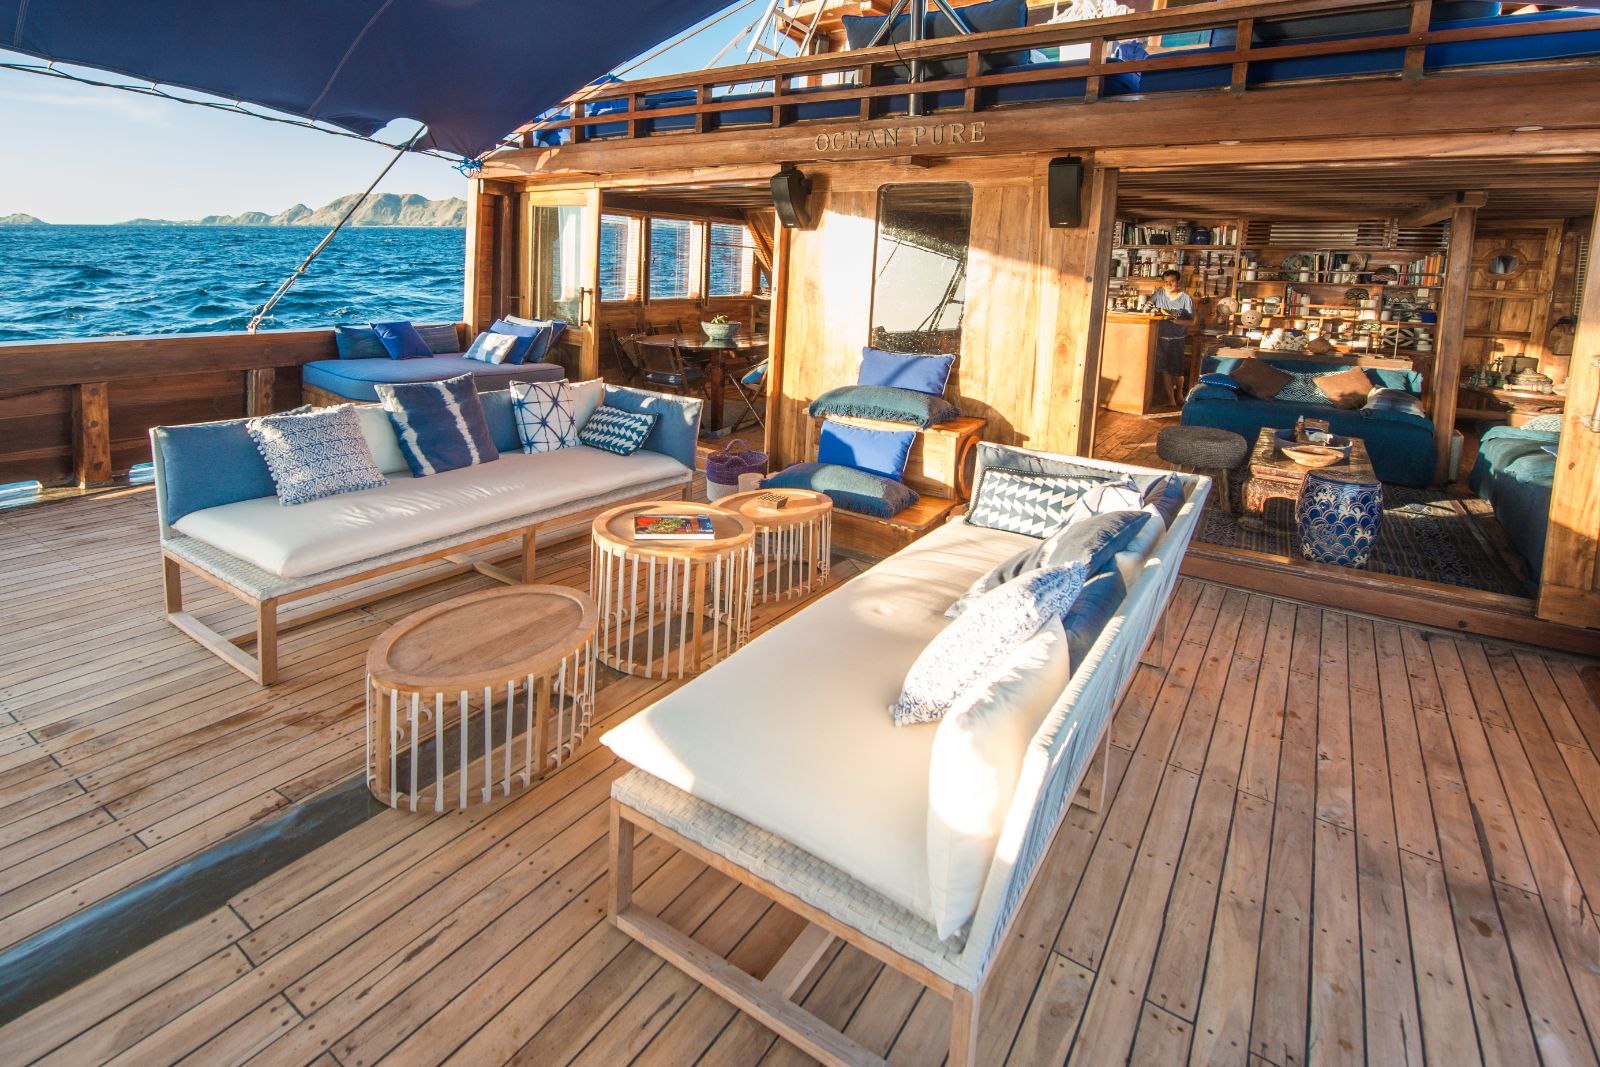 Lounge deck onboard the Ocean Pure phinsi in Indonesia